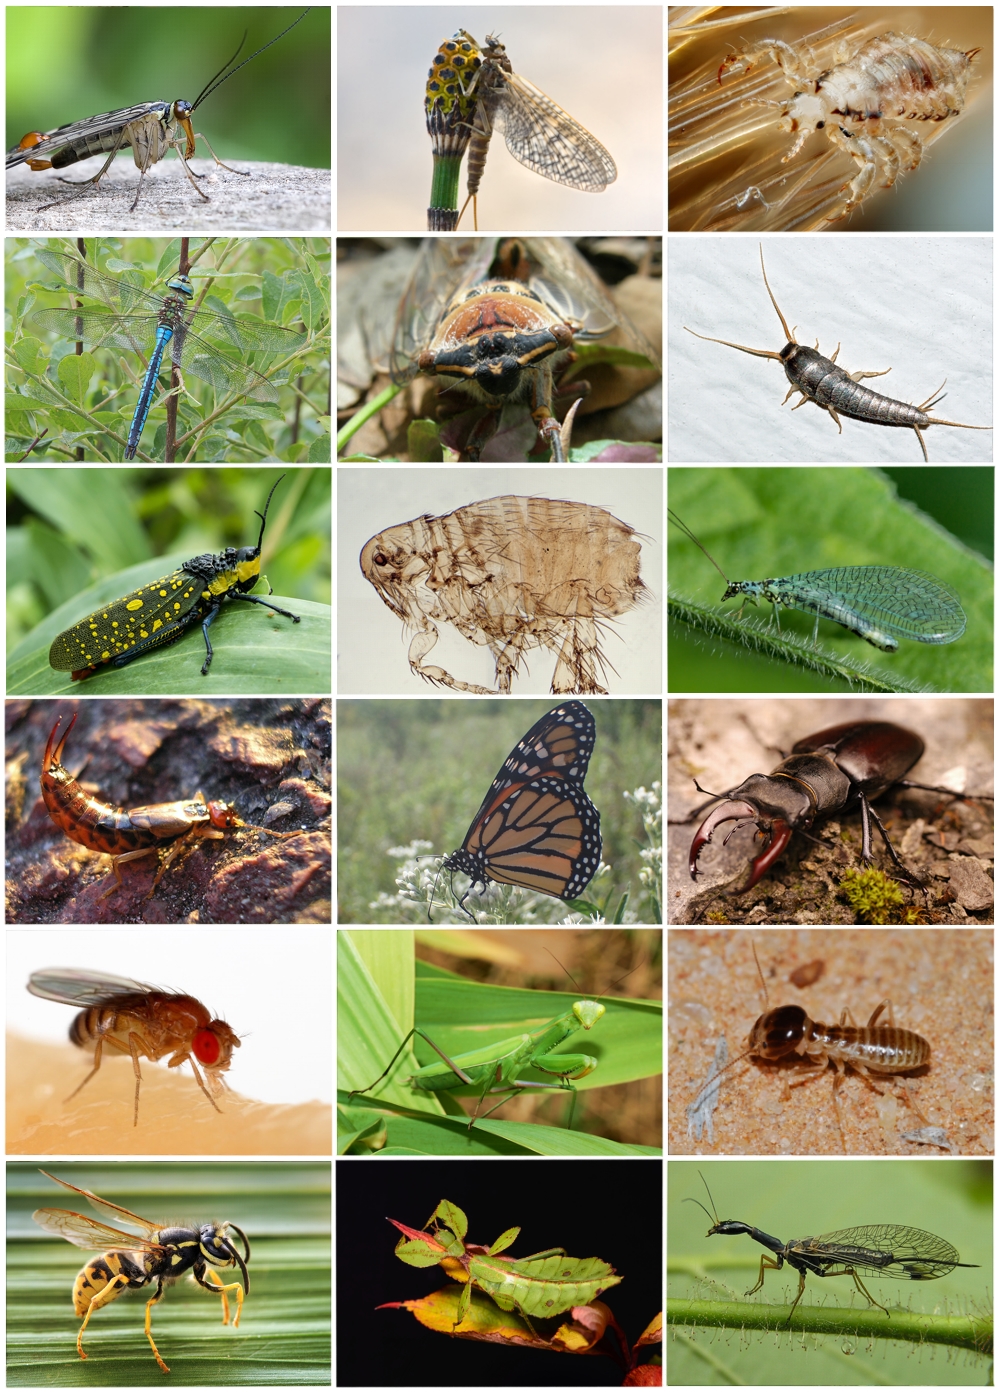 Detail Images Of Bugs And Insects Nomer 6